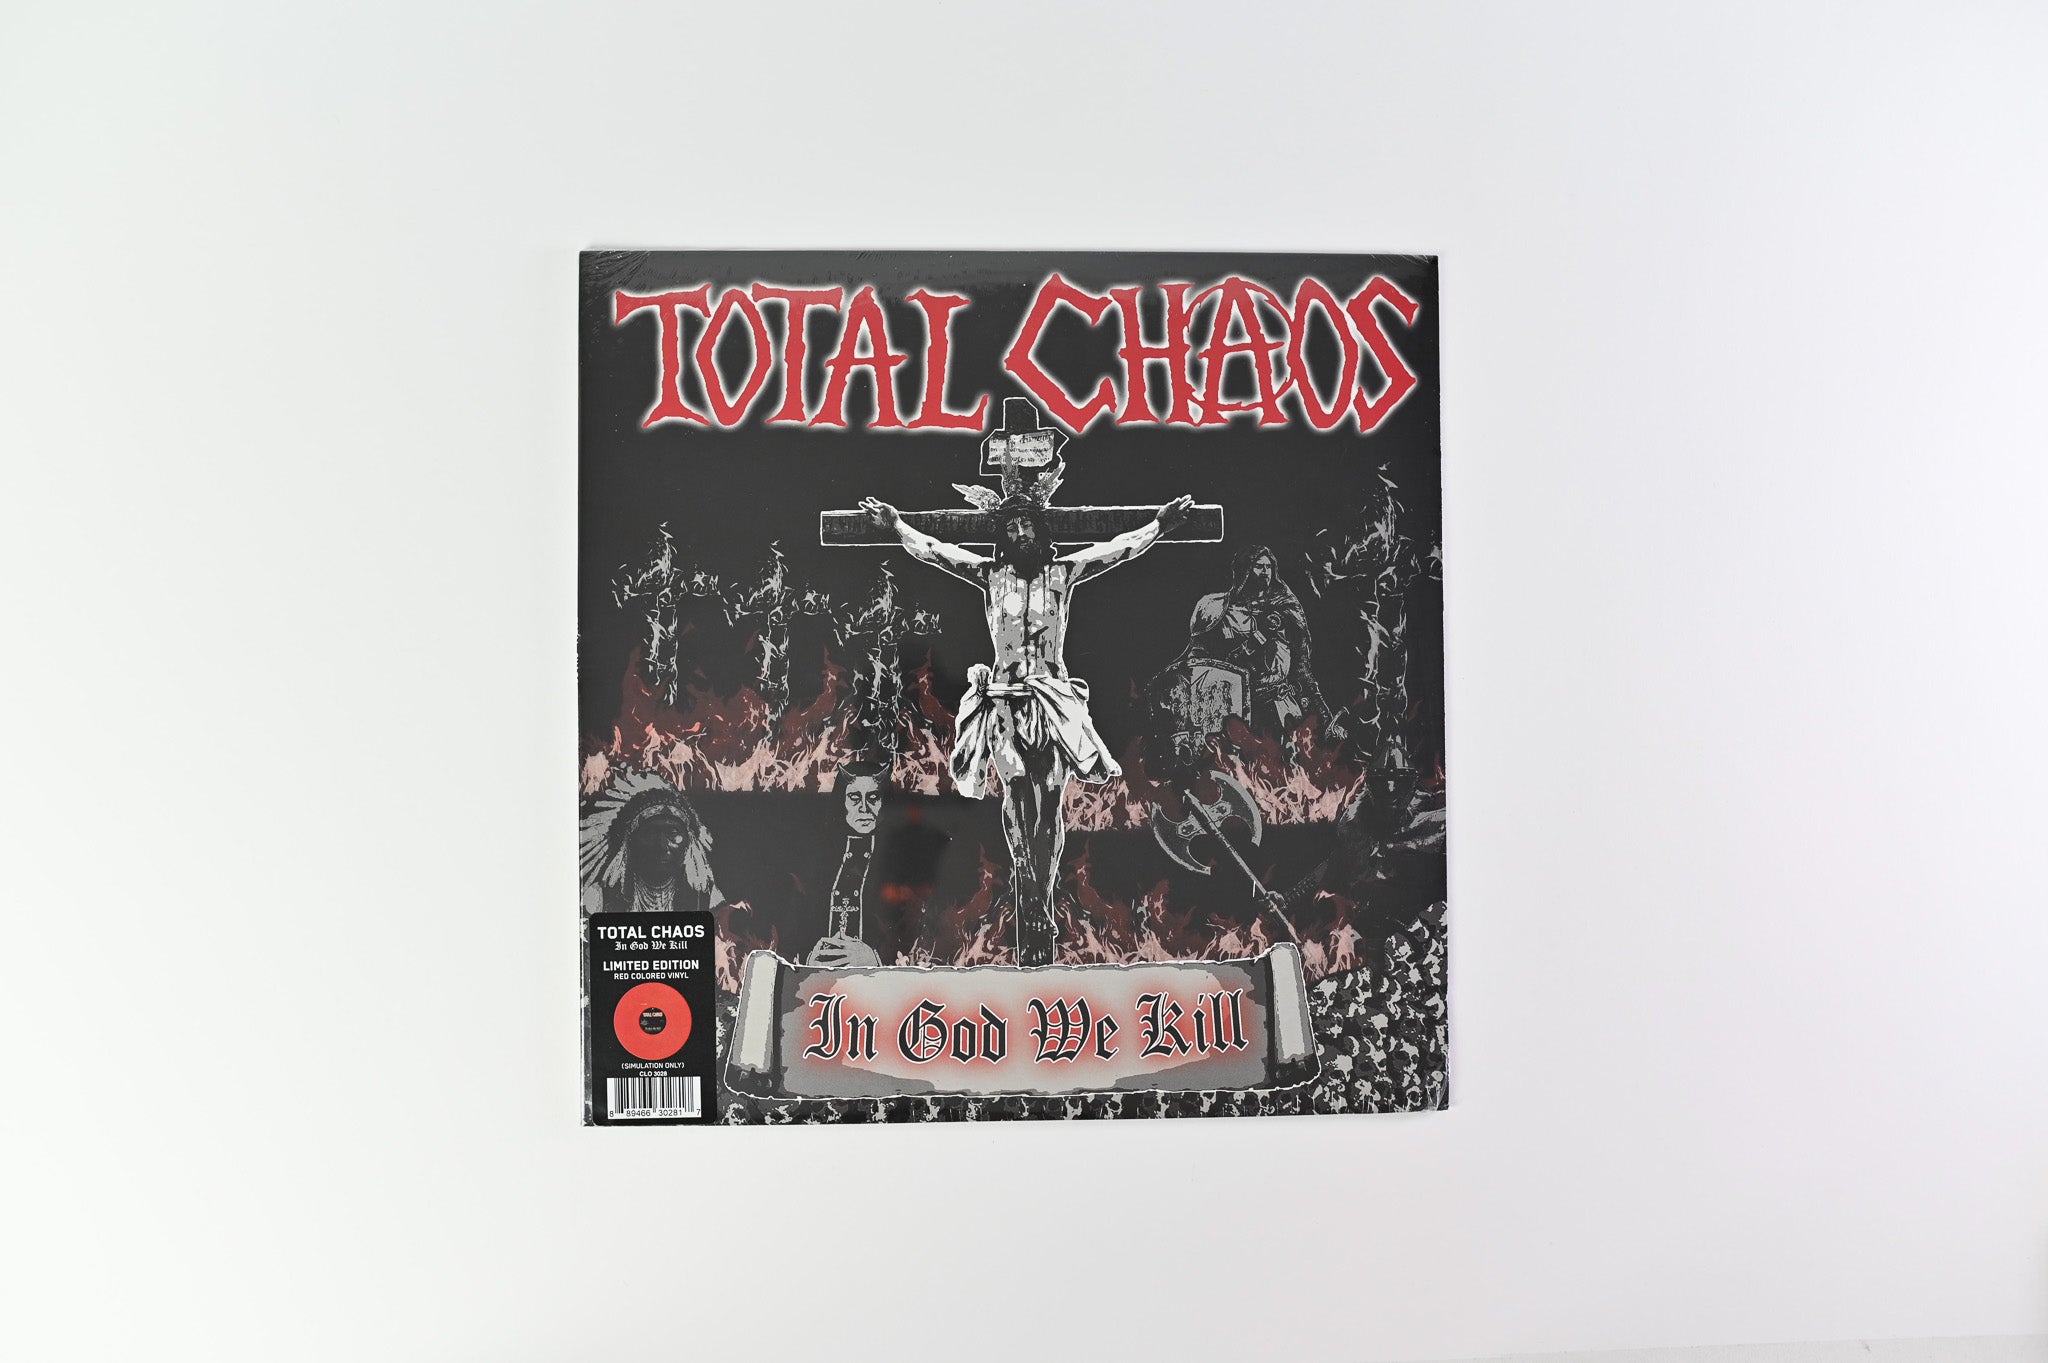 Total Chaos - In God We Kill on Cleopatra - Red Vinyl Sealed